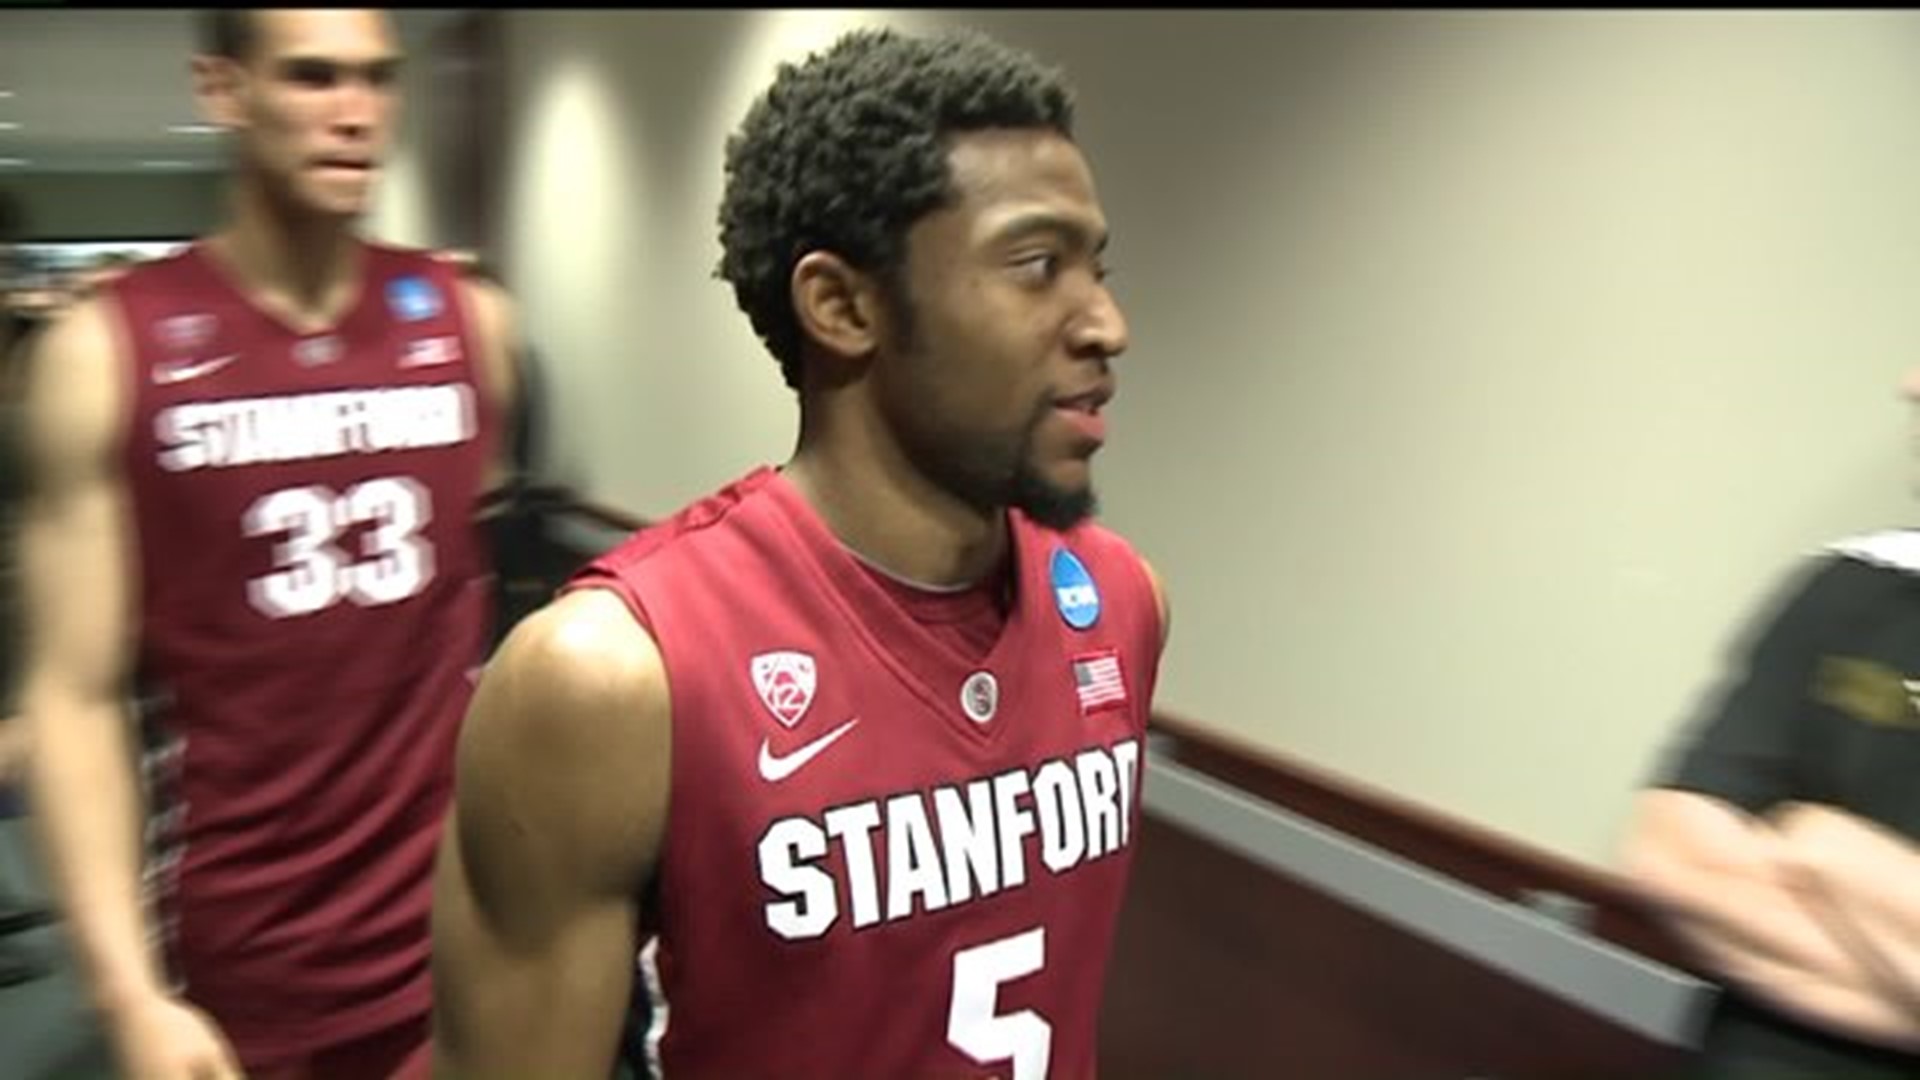 Randle Passes Alcindor, Eyes Stanford All-Time Pts Record